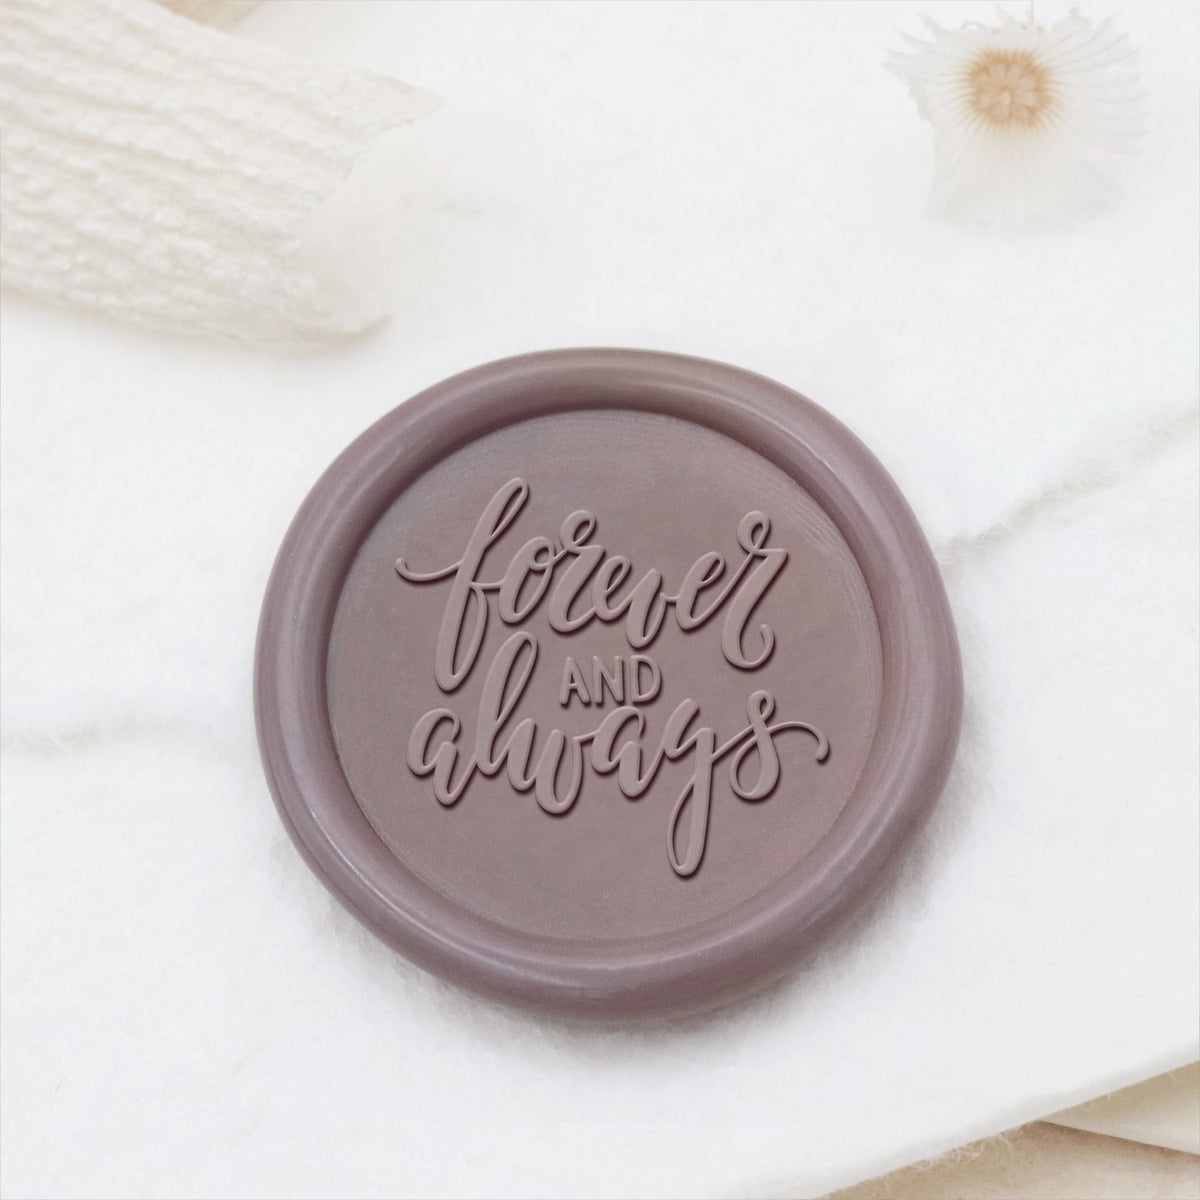 Wedding Invitation & Announcement Wax Seal Stamp - Style 24 24-2